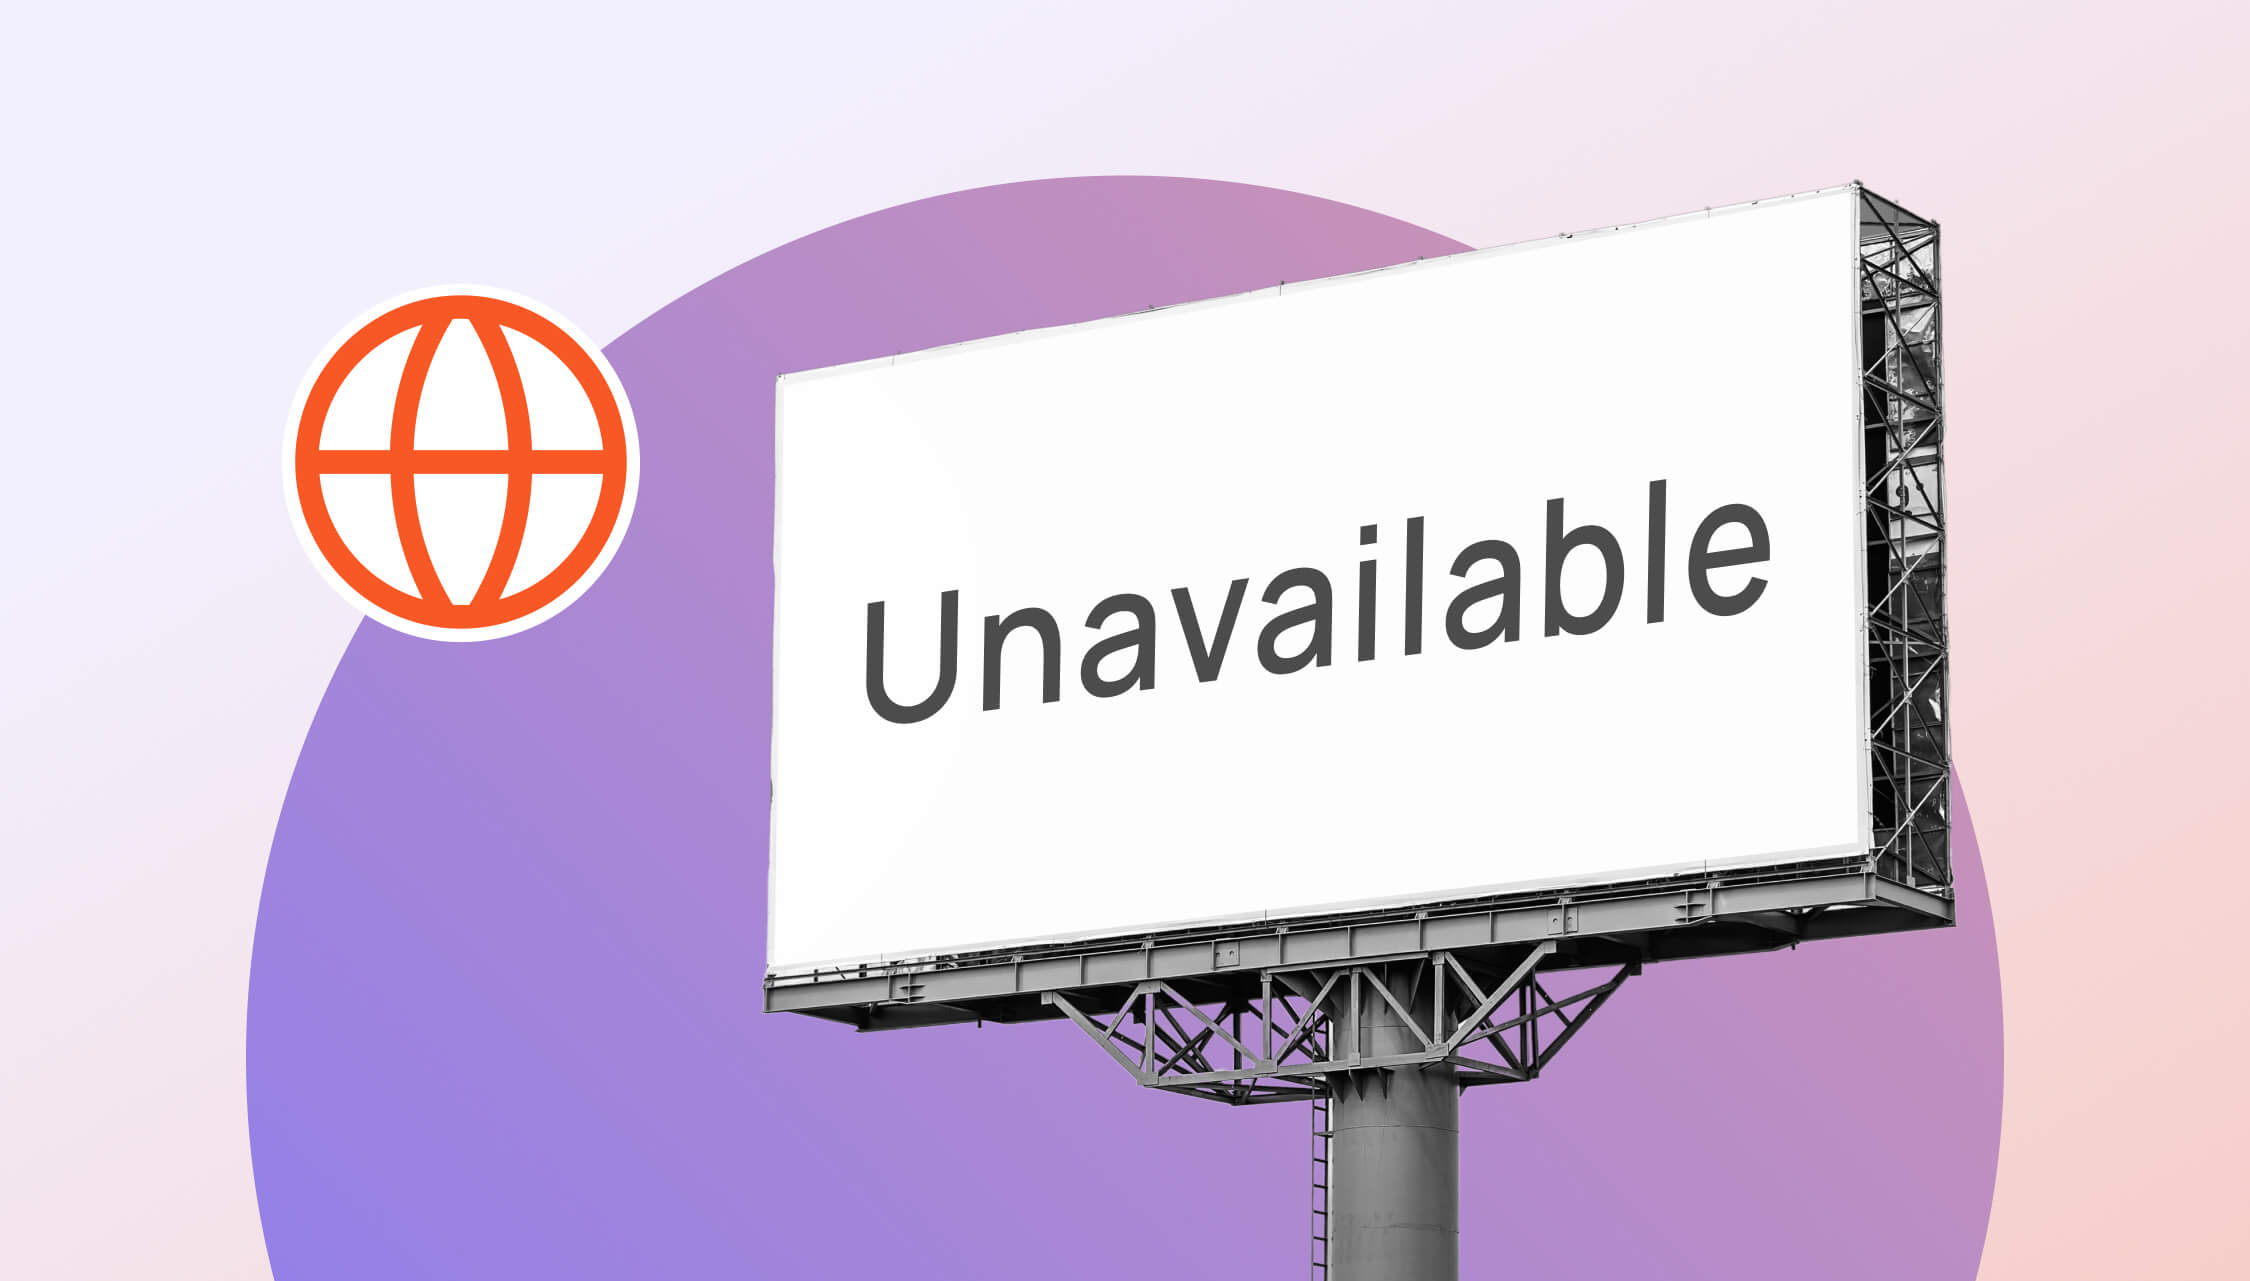 Billboard with the word "Unavailable" on purple background and an orange domain icon.